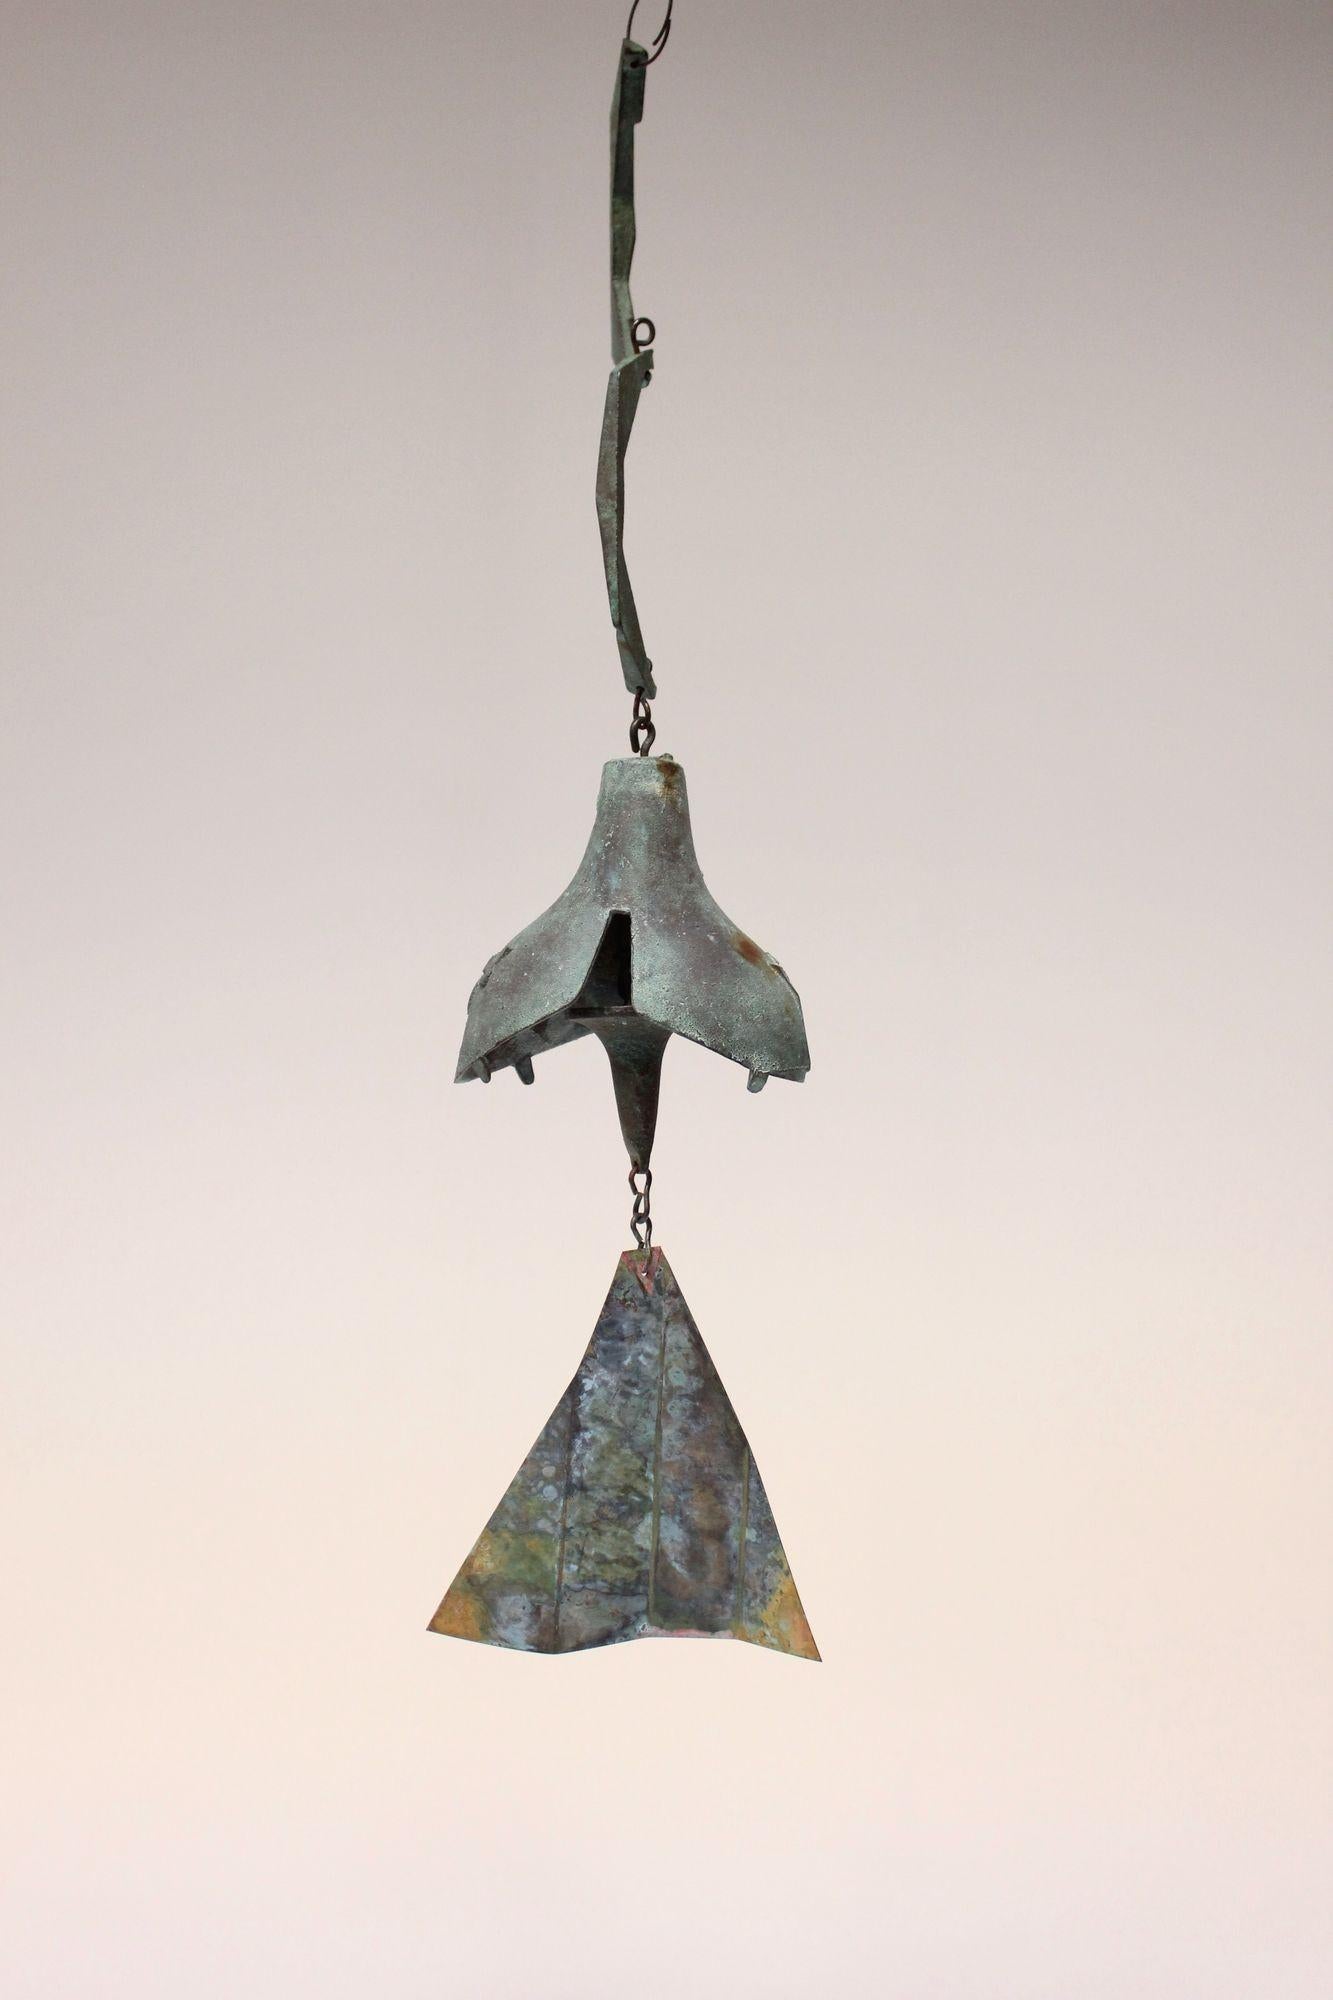 Wind chime/bell designed by architect, Paolo Soleri for Arconsanti (the city he designed and built in Arizona in 1970).
Bronze cast elements with verdigris patina and multi-color pigmented fin. Early production with attractive colors